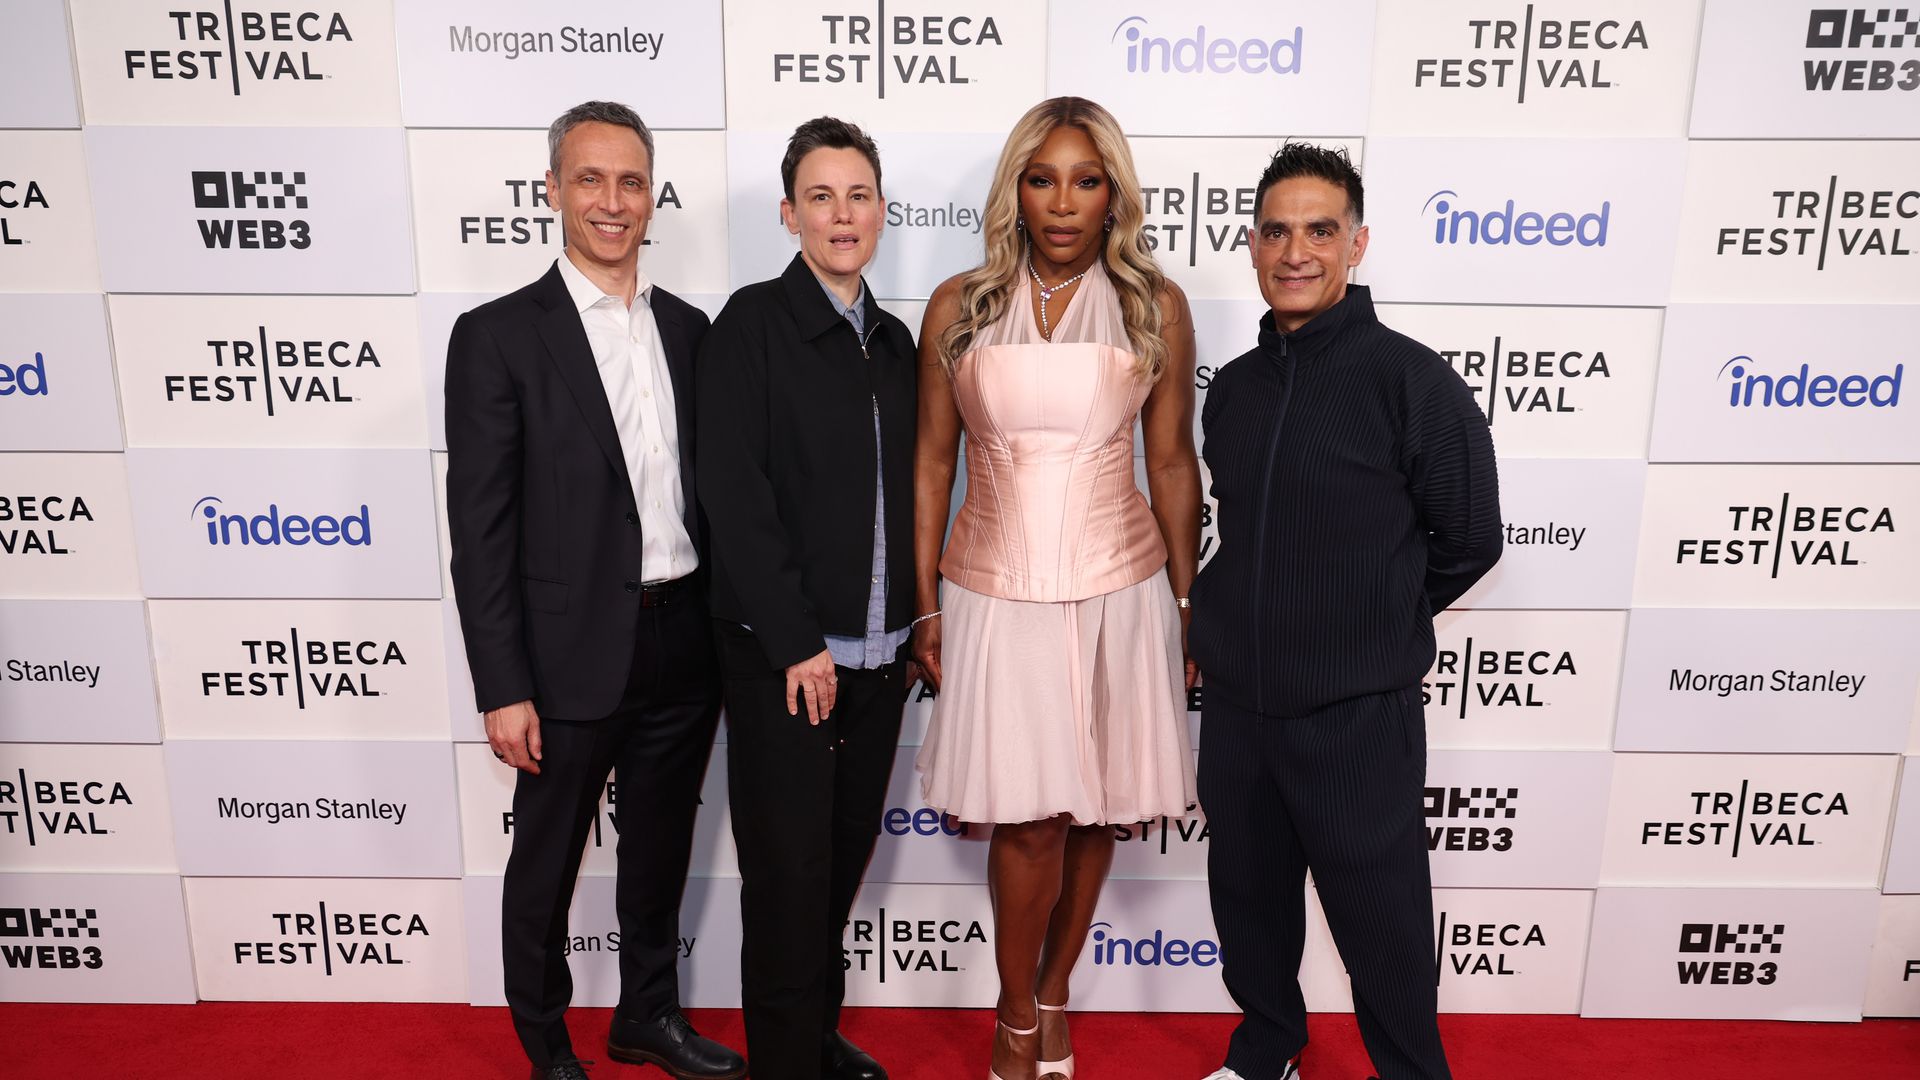 Lauren Fisher, Serena Williams and Gotham Chopra join in "In the Arena: Serena Williams" It will premiere during the 2024 Tribeca Festival at the BMCC Theater in New York City on June 13, 2024.